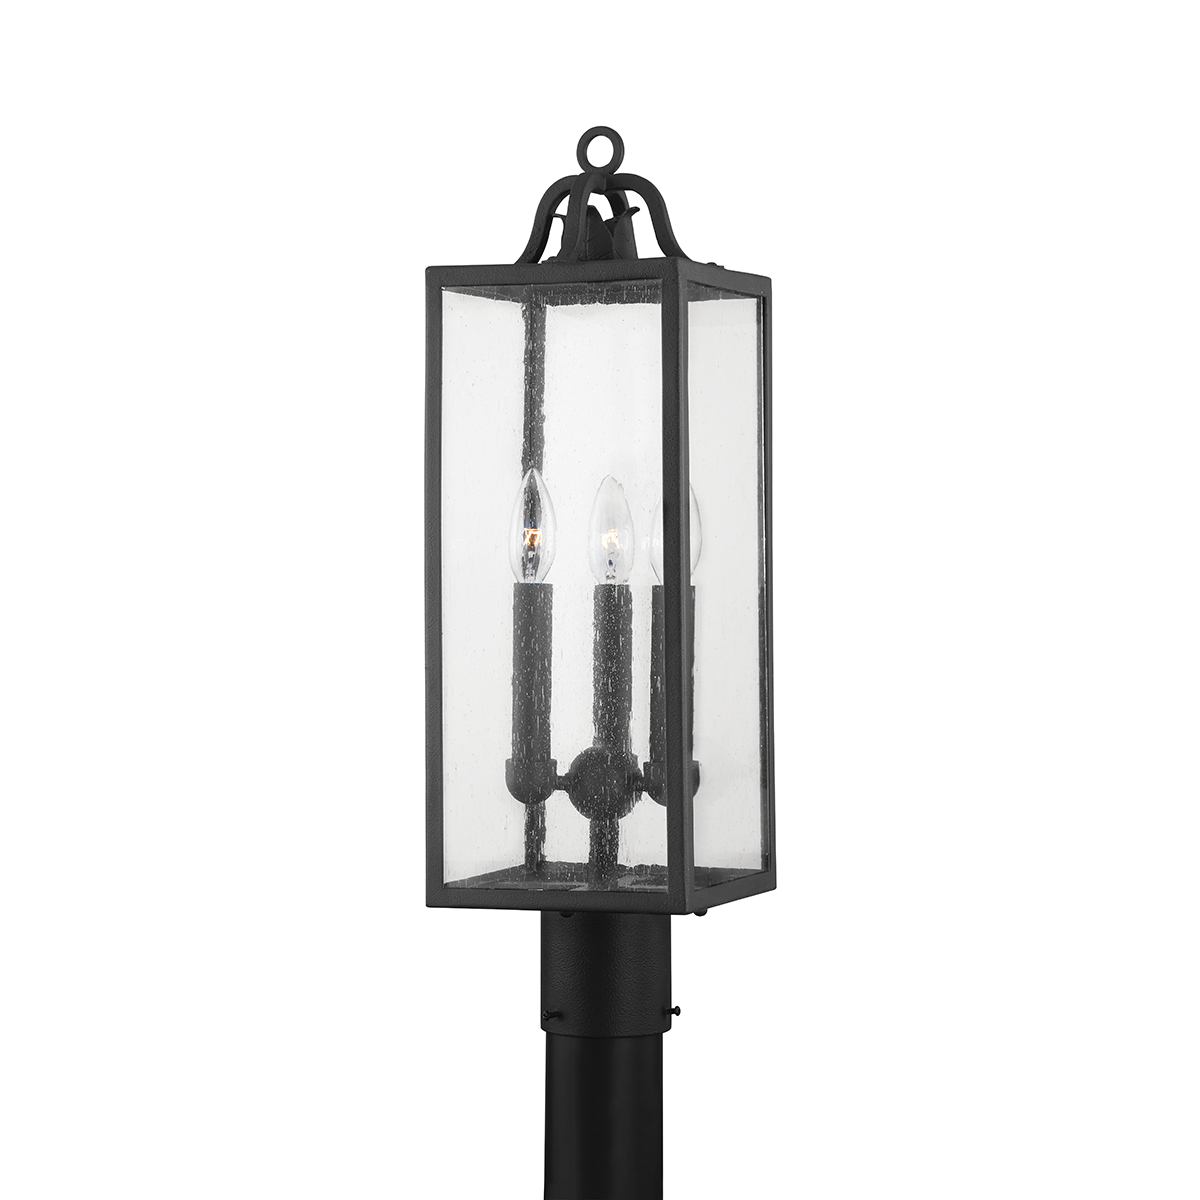 Troy Lighting Caiden Post Post Troy Lighting FORGED IRON 7x7x22 